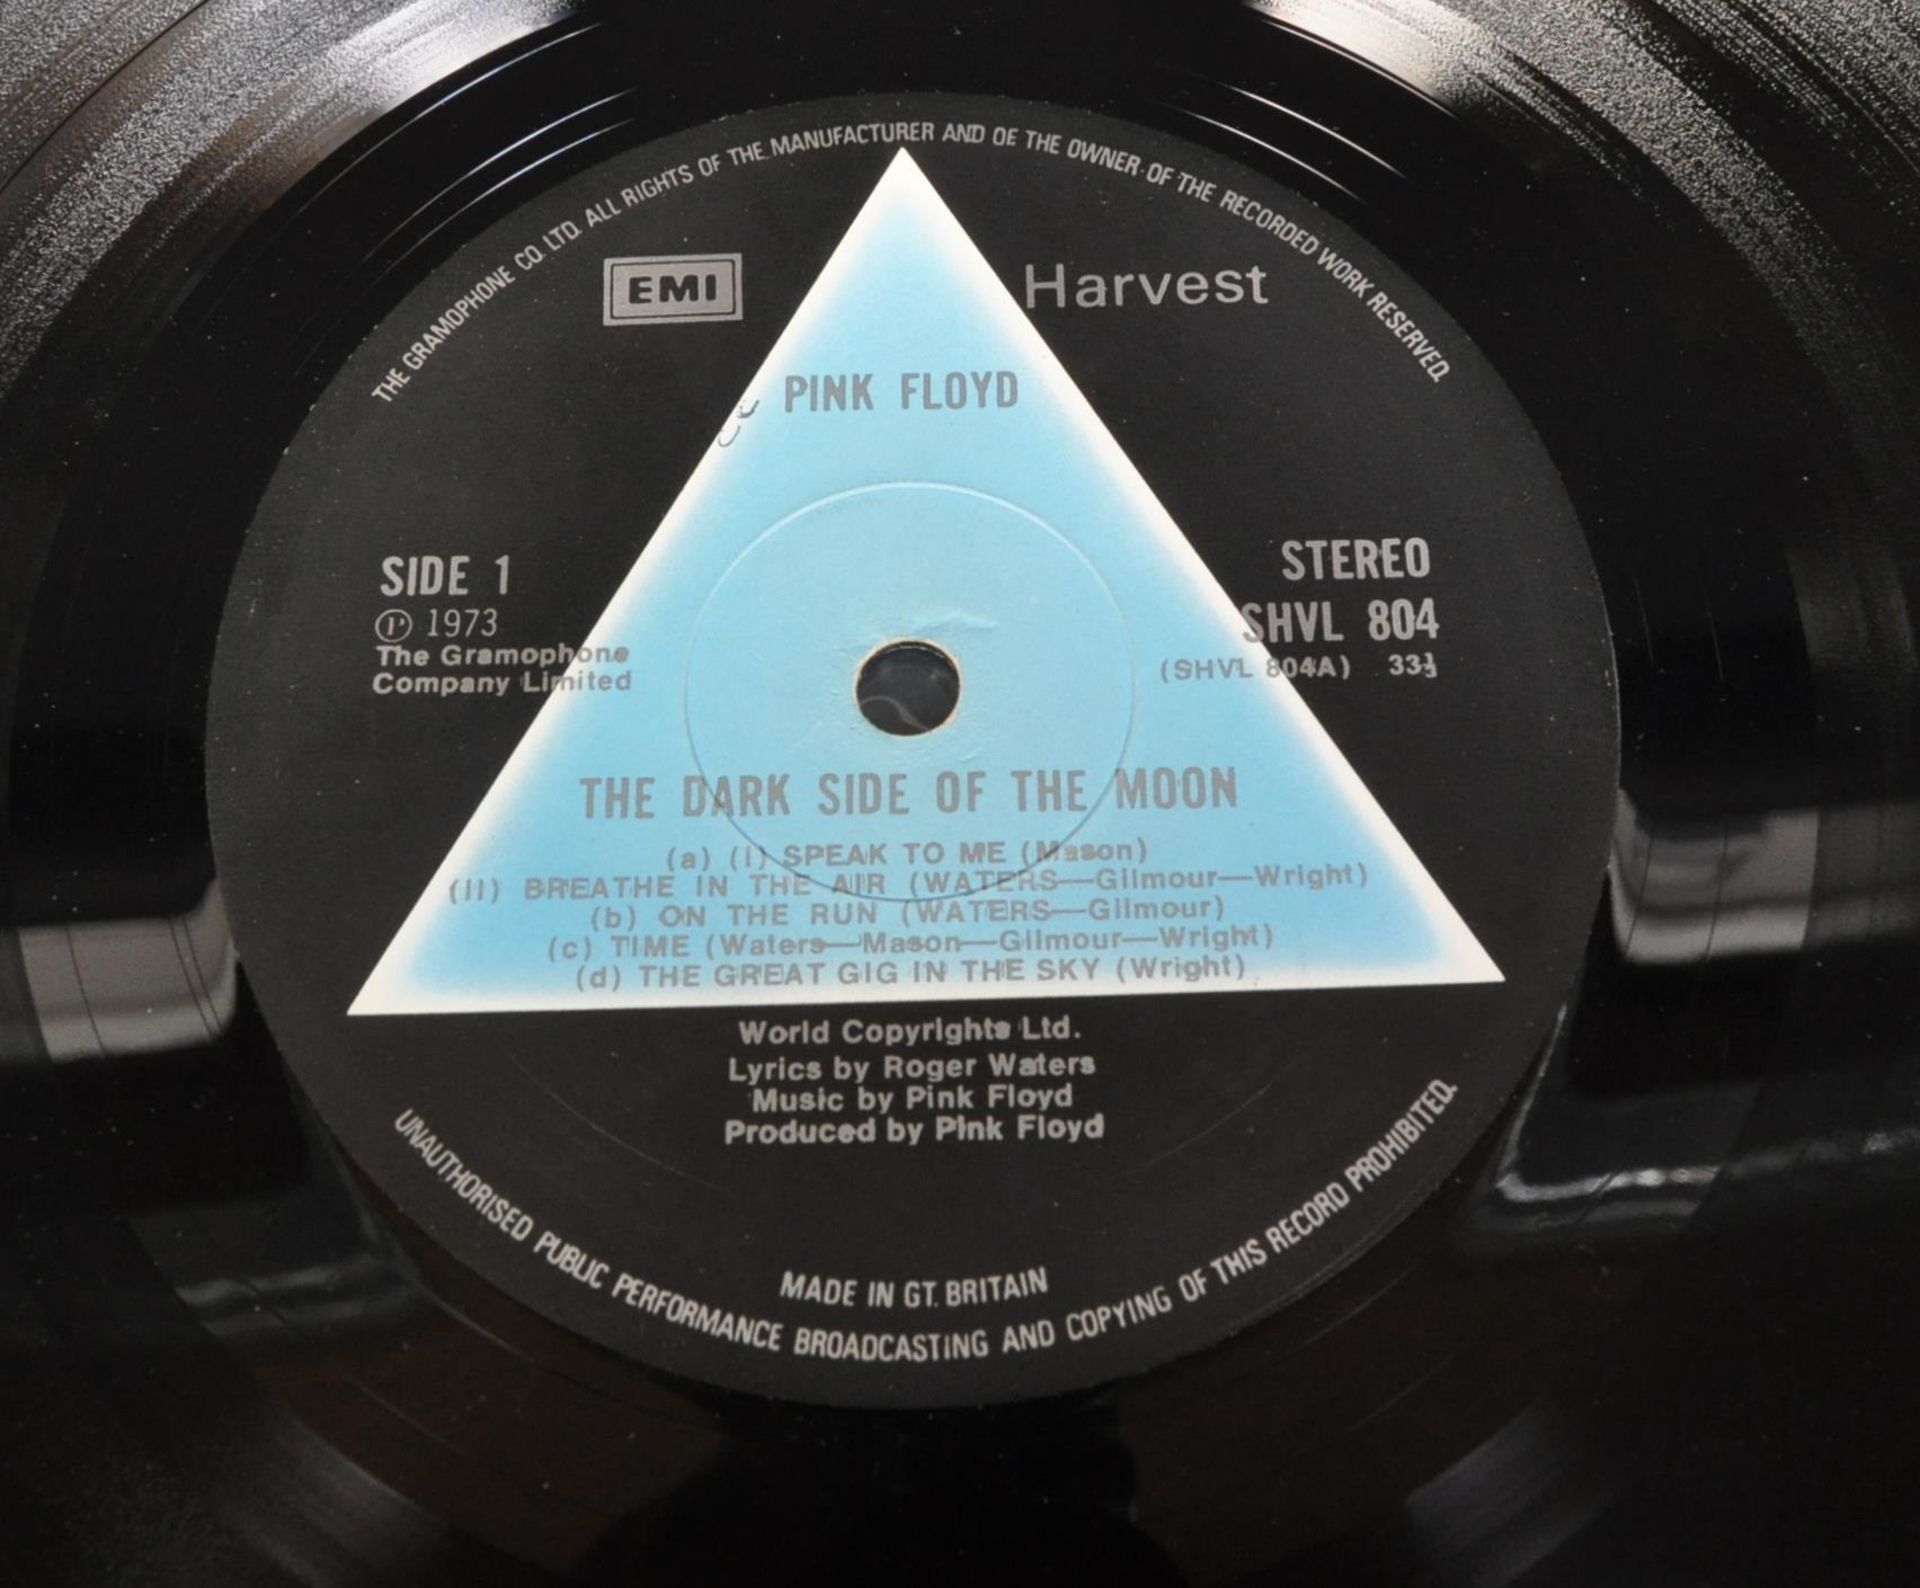 PINK FLOYD - DARK SIDE OF THE MOON - FIRST PRESSING - VINYL RECORD - Image 4 of 5